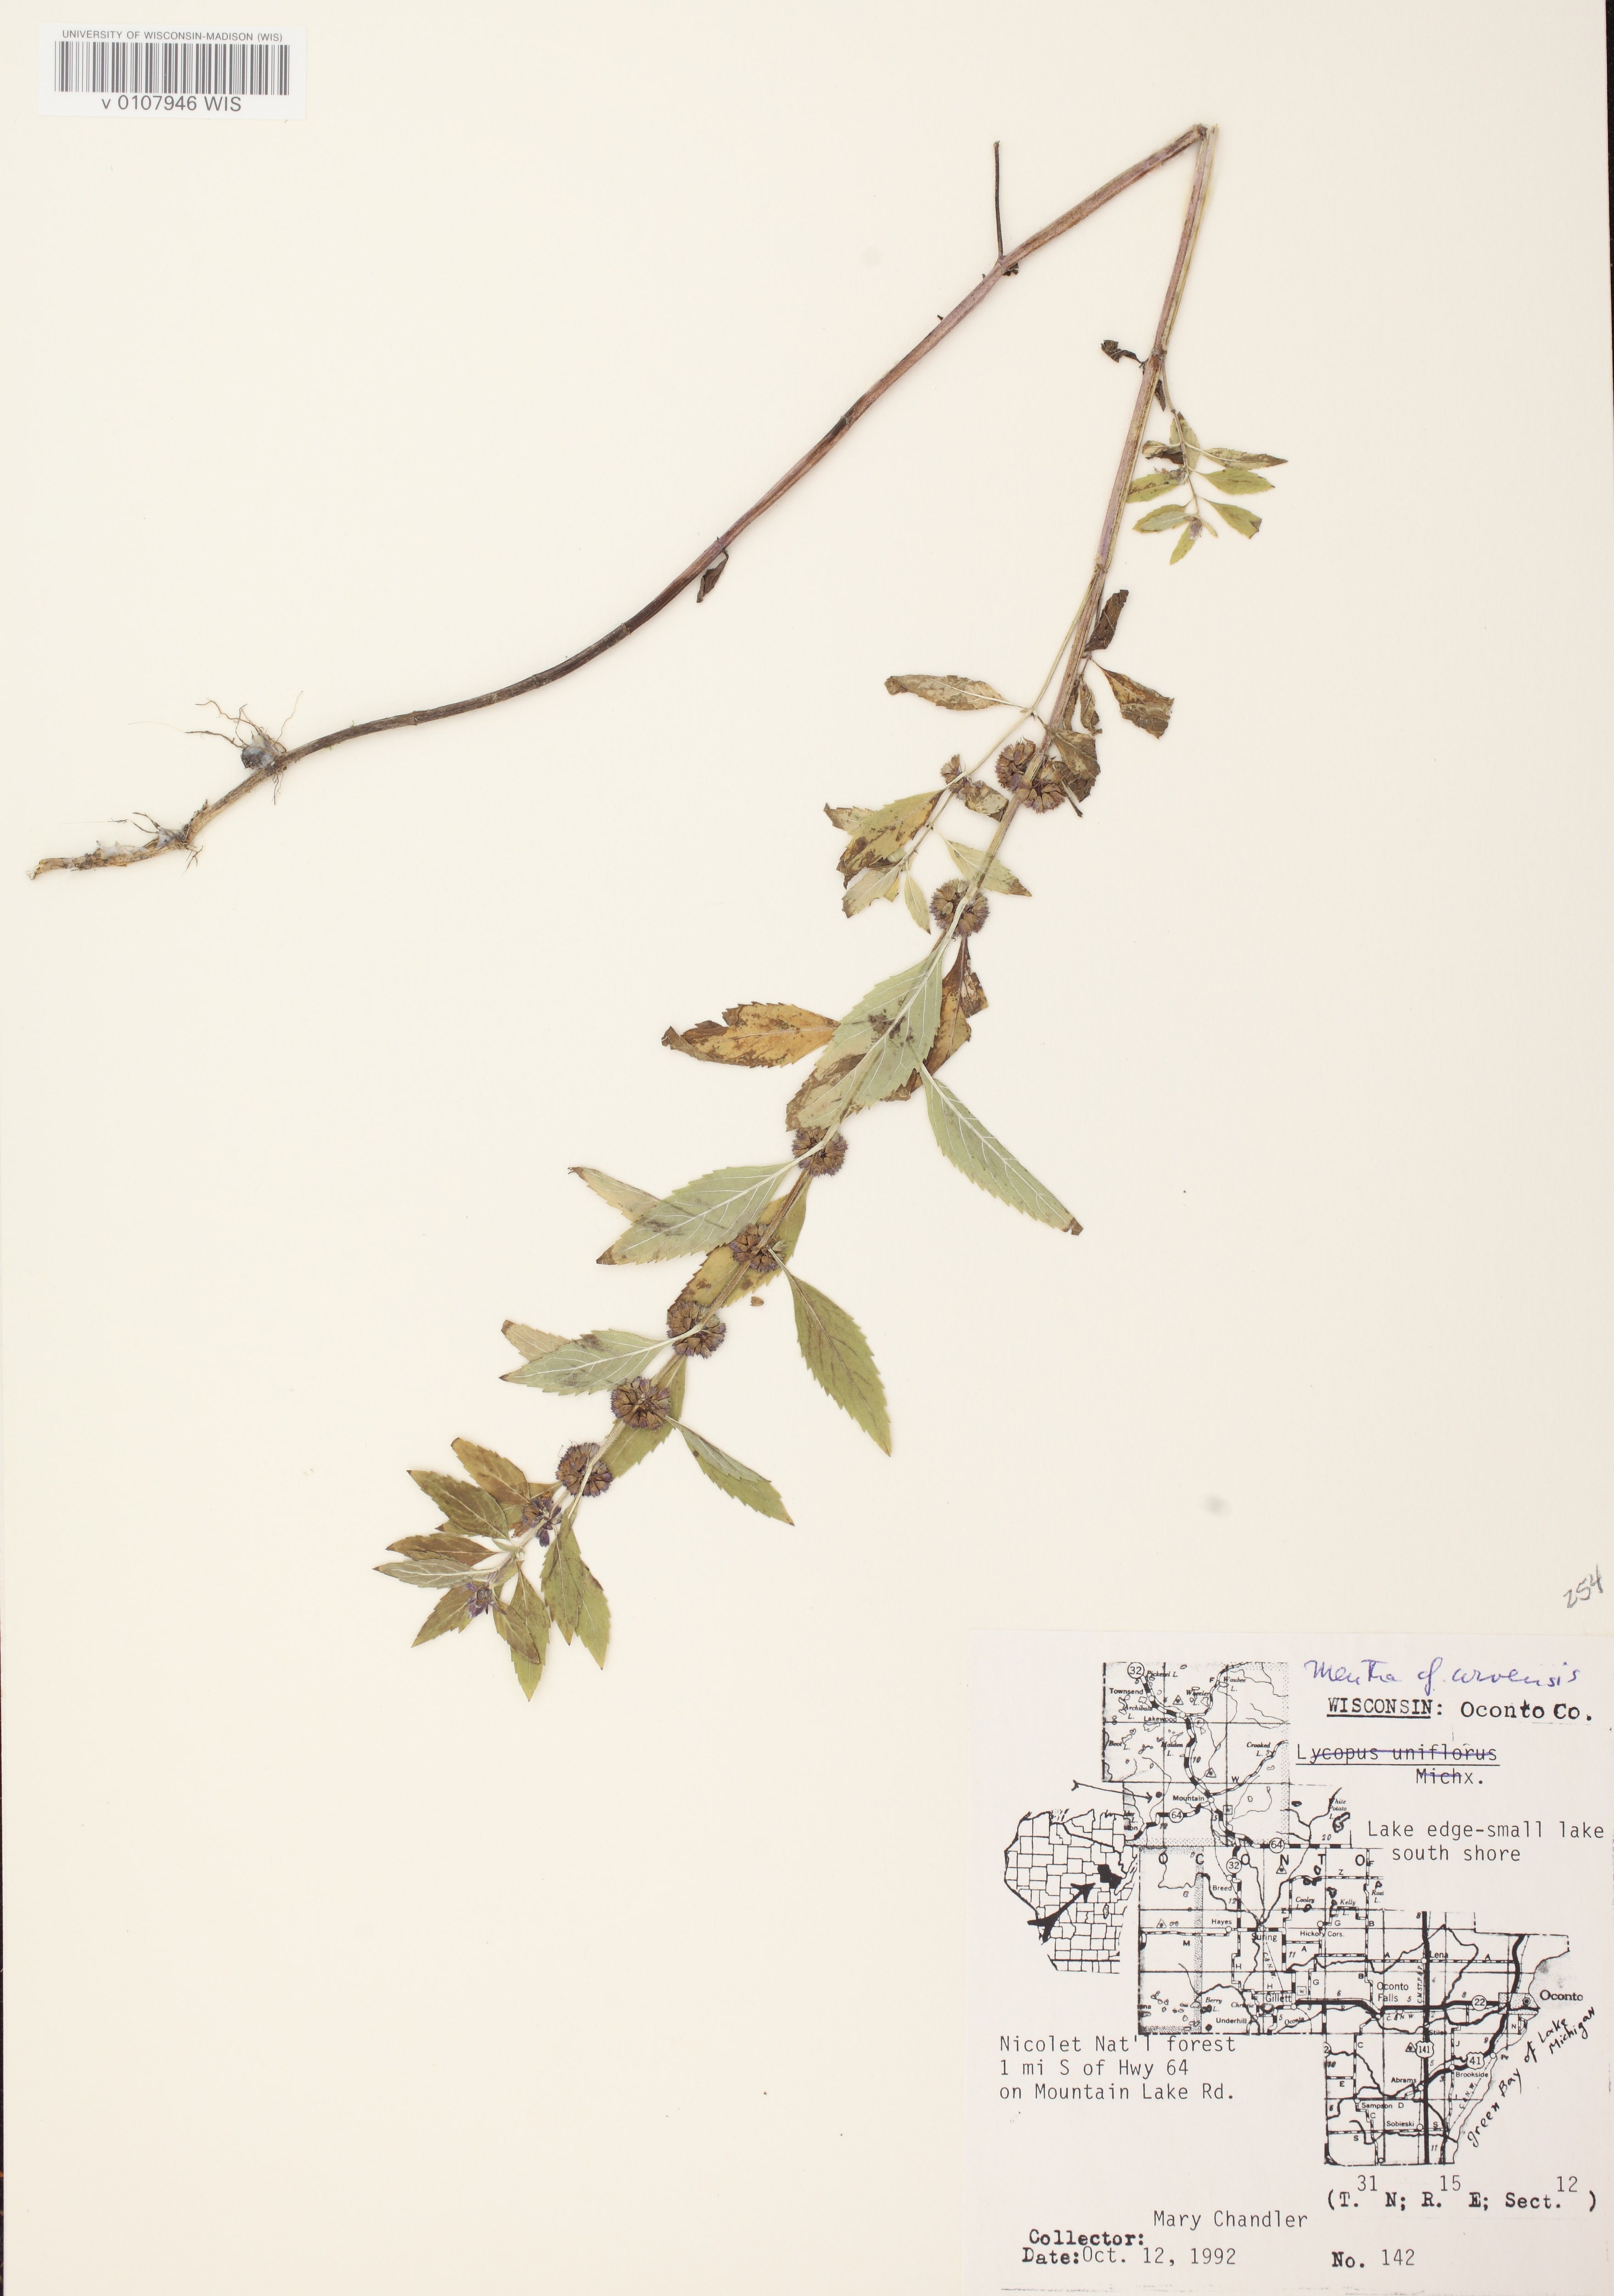 Field Mint specimen collected in Nicolet National Forest on October 12, 1992.